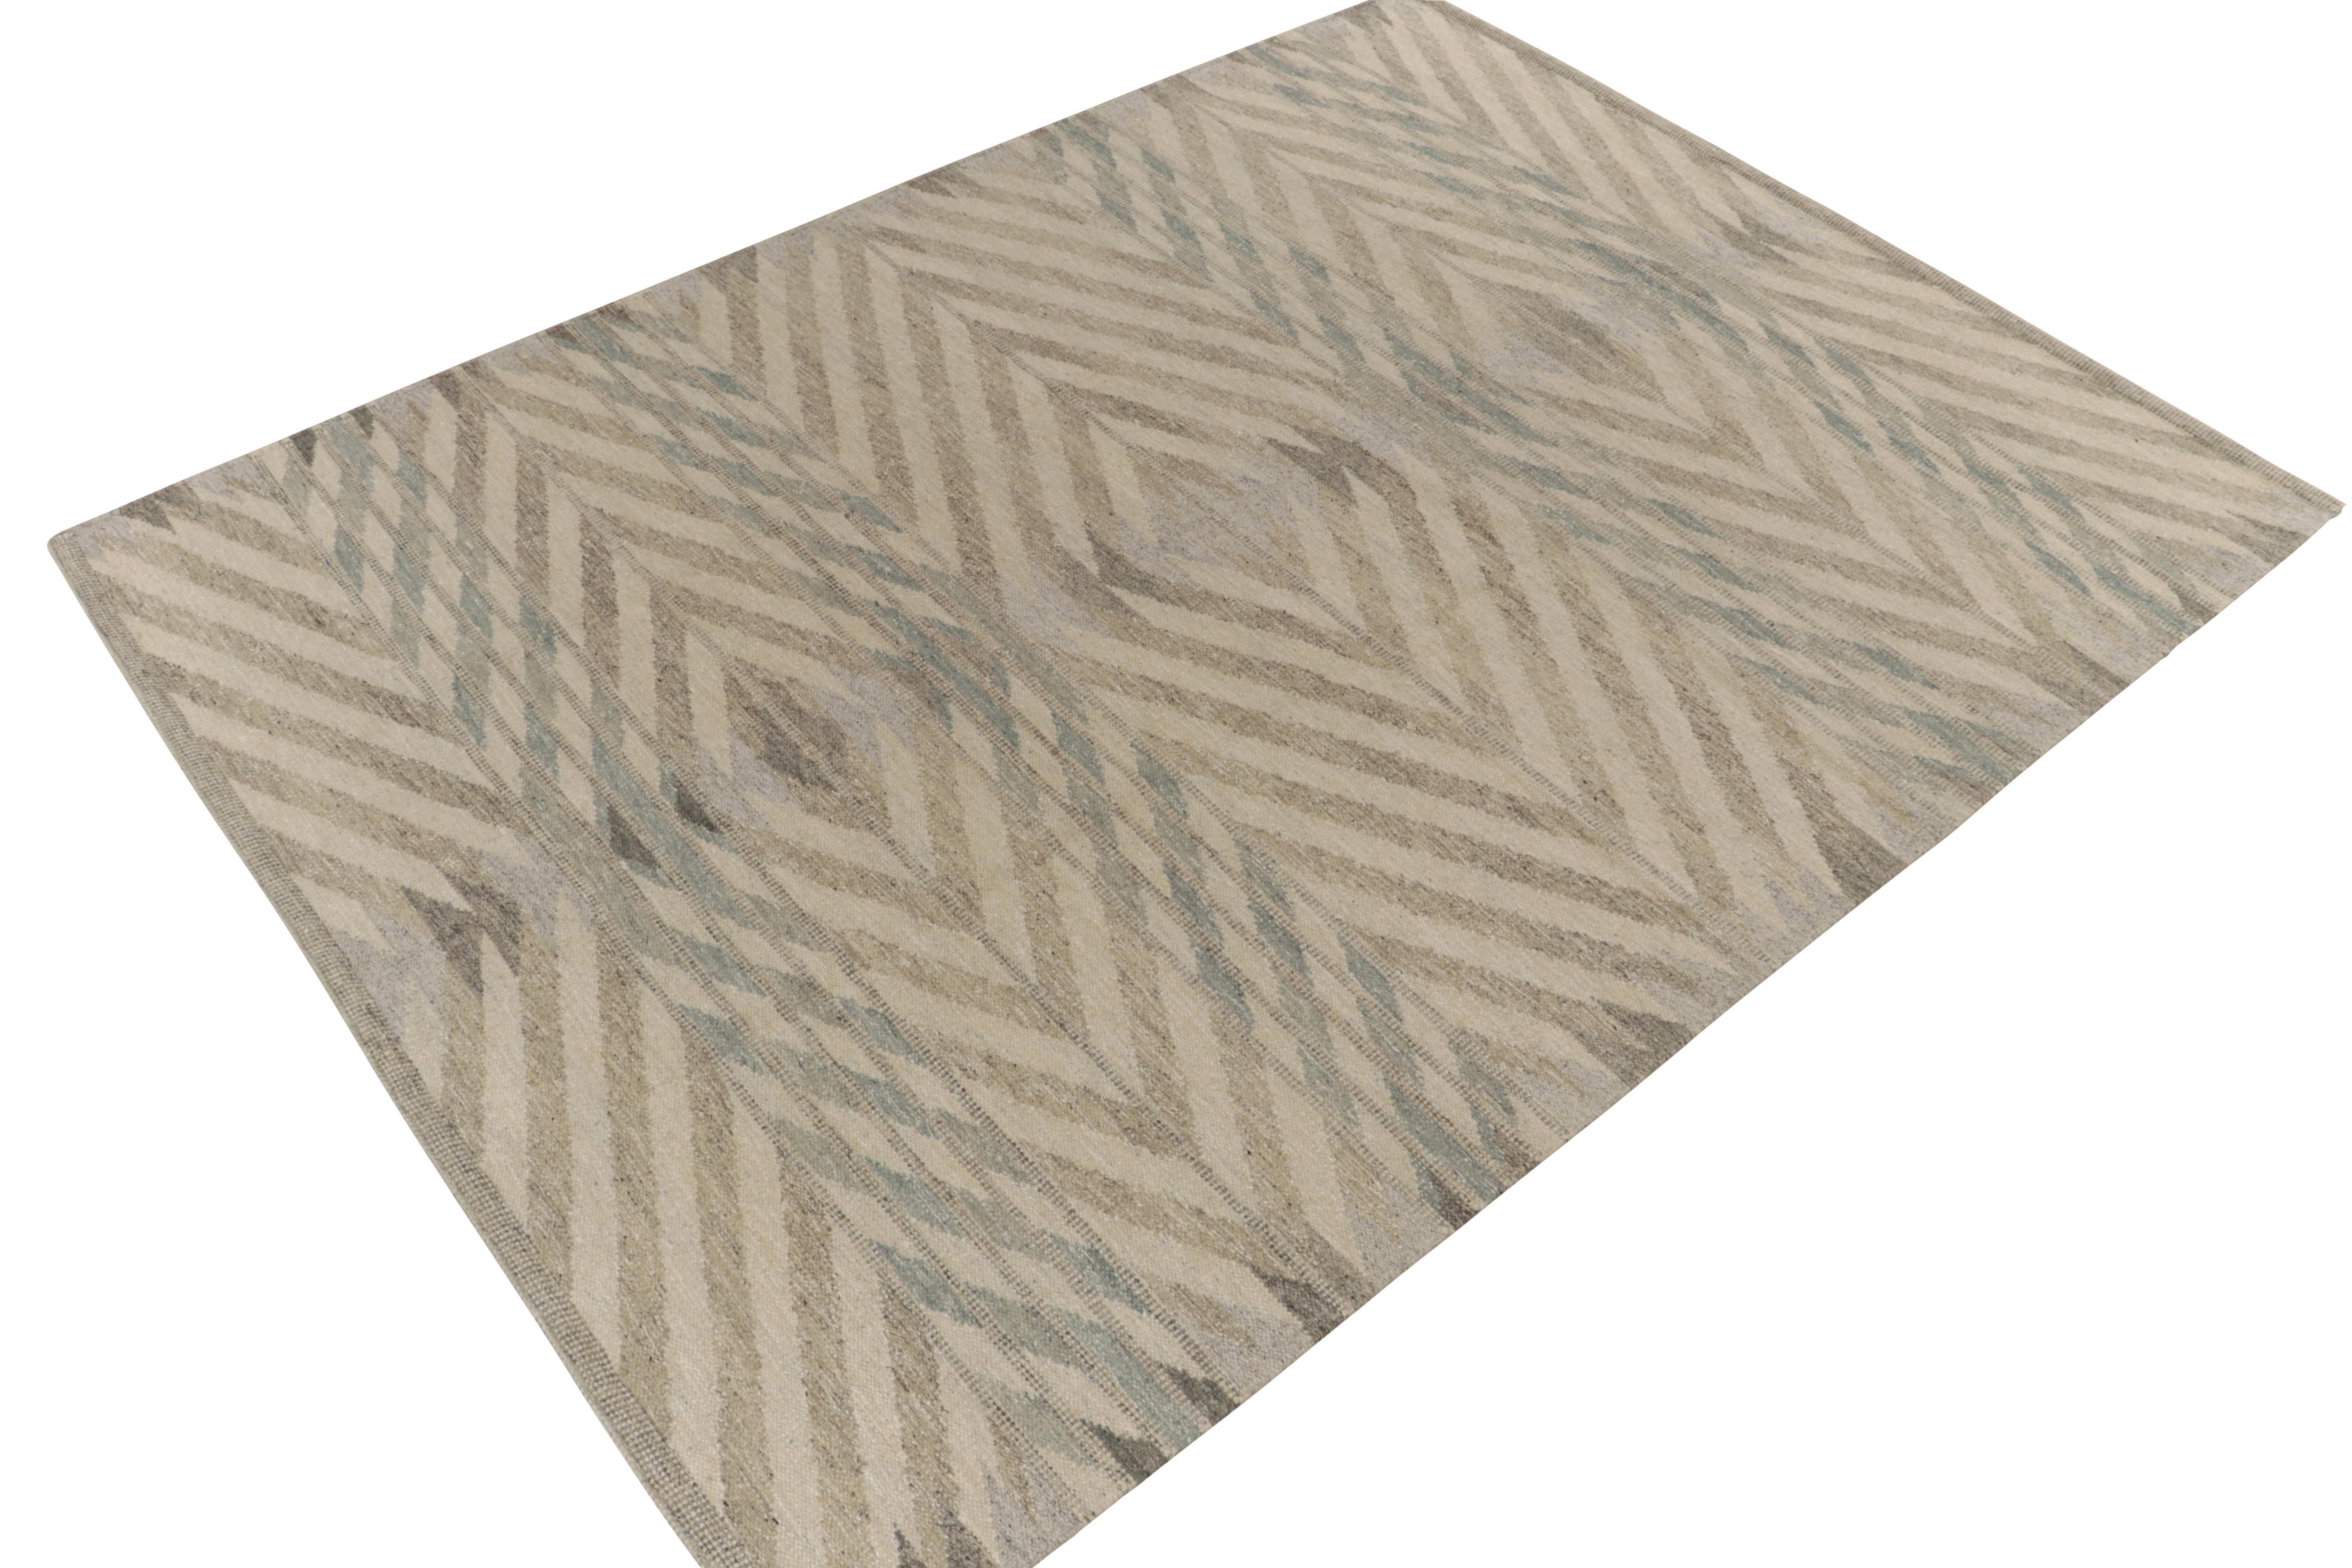 Rug & Kilim’s innovative take on Scandinavian Kilims, from our celebrated flatweave line of the titular award-winning collection. This 8x10 rug exemplifies the finesse of Swedish aesthetics with a rippling geometric pattern casting a 3D impression